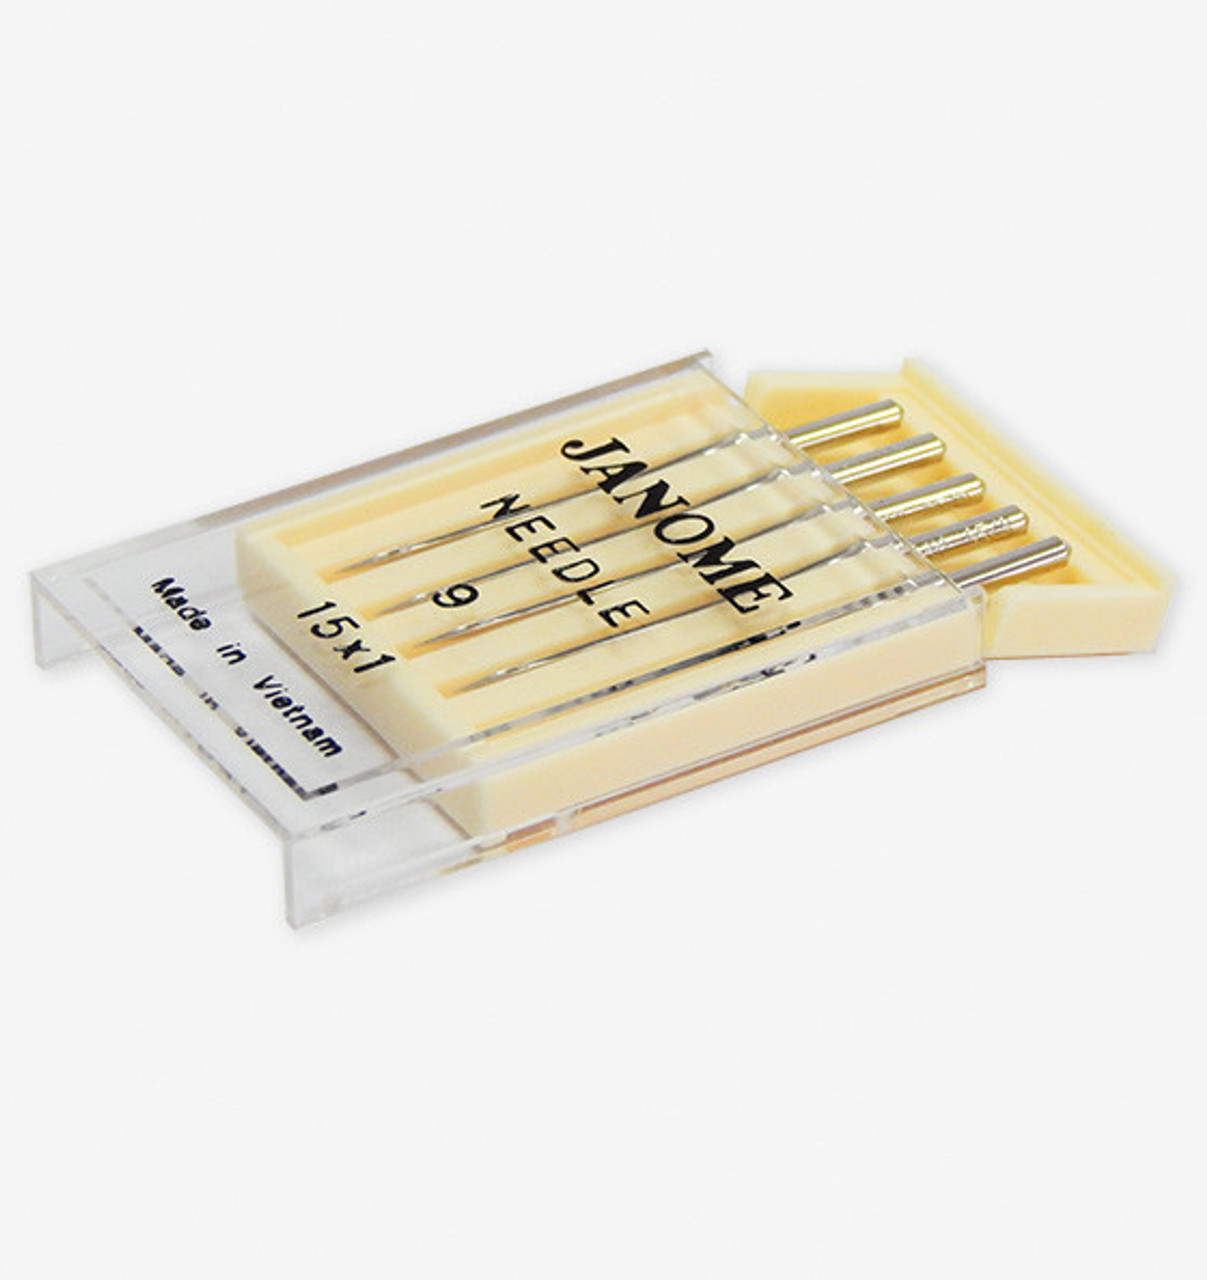 Nuvalu Hand Sewing Needles and threader. 90 hand needles / 1